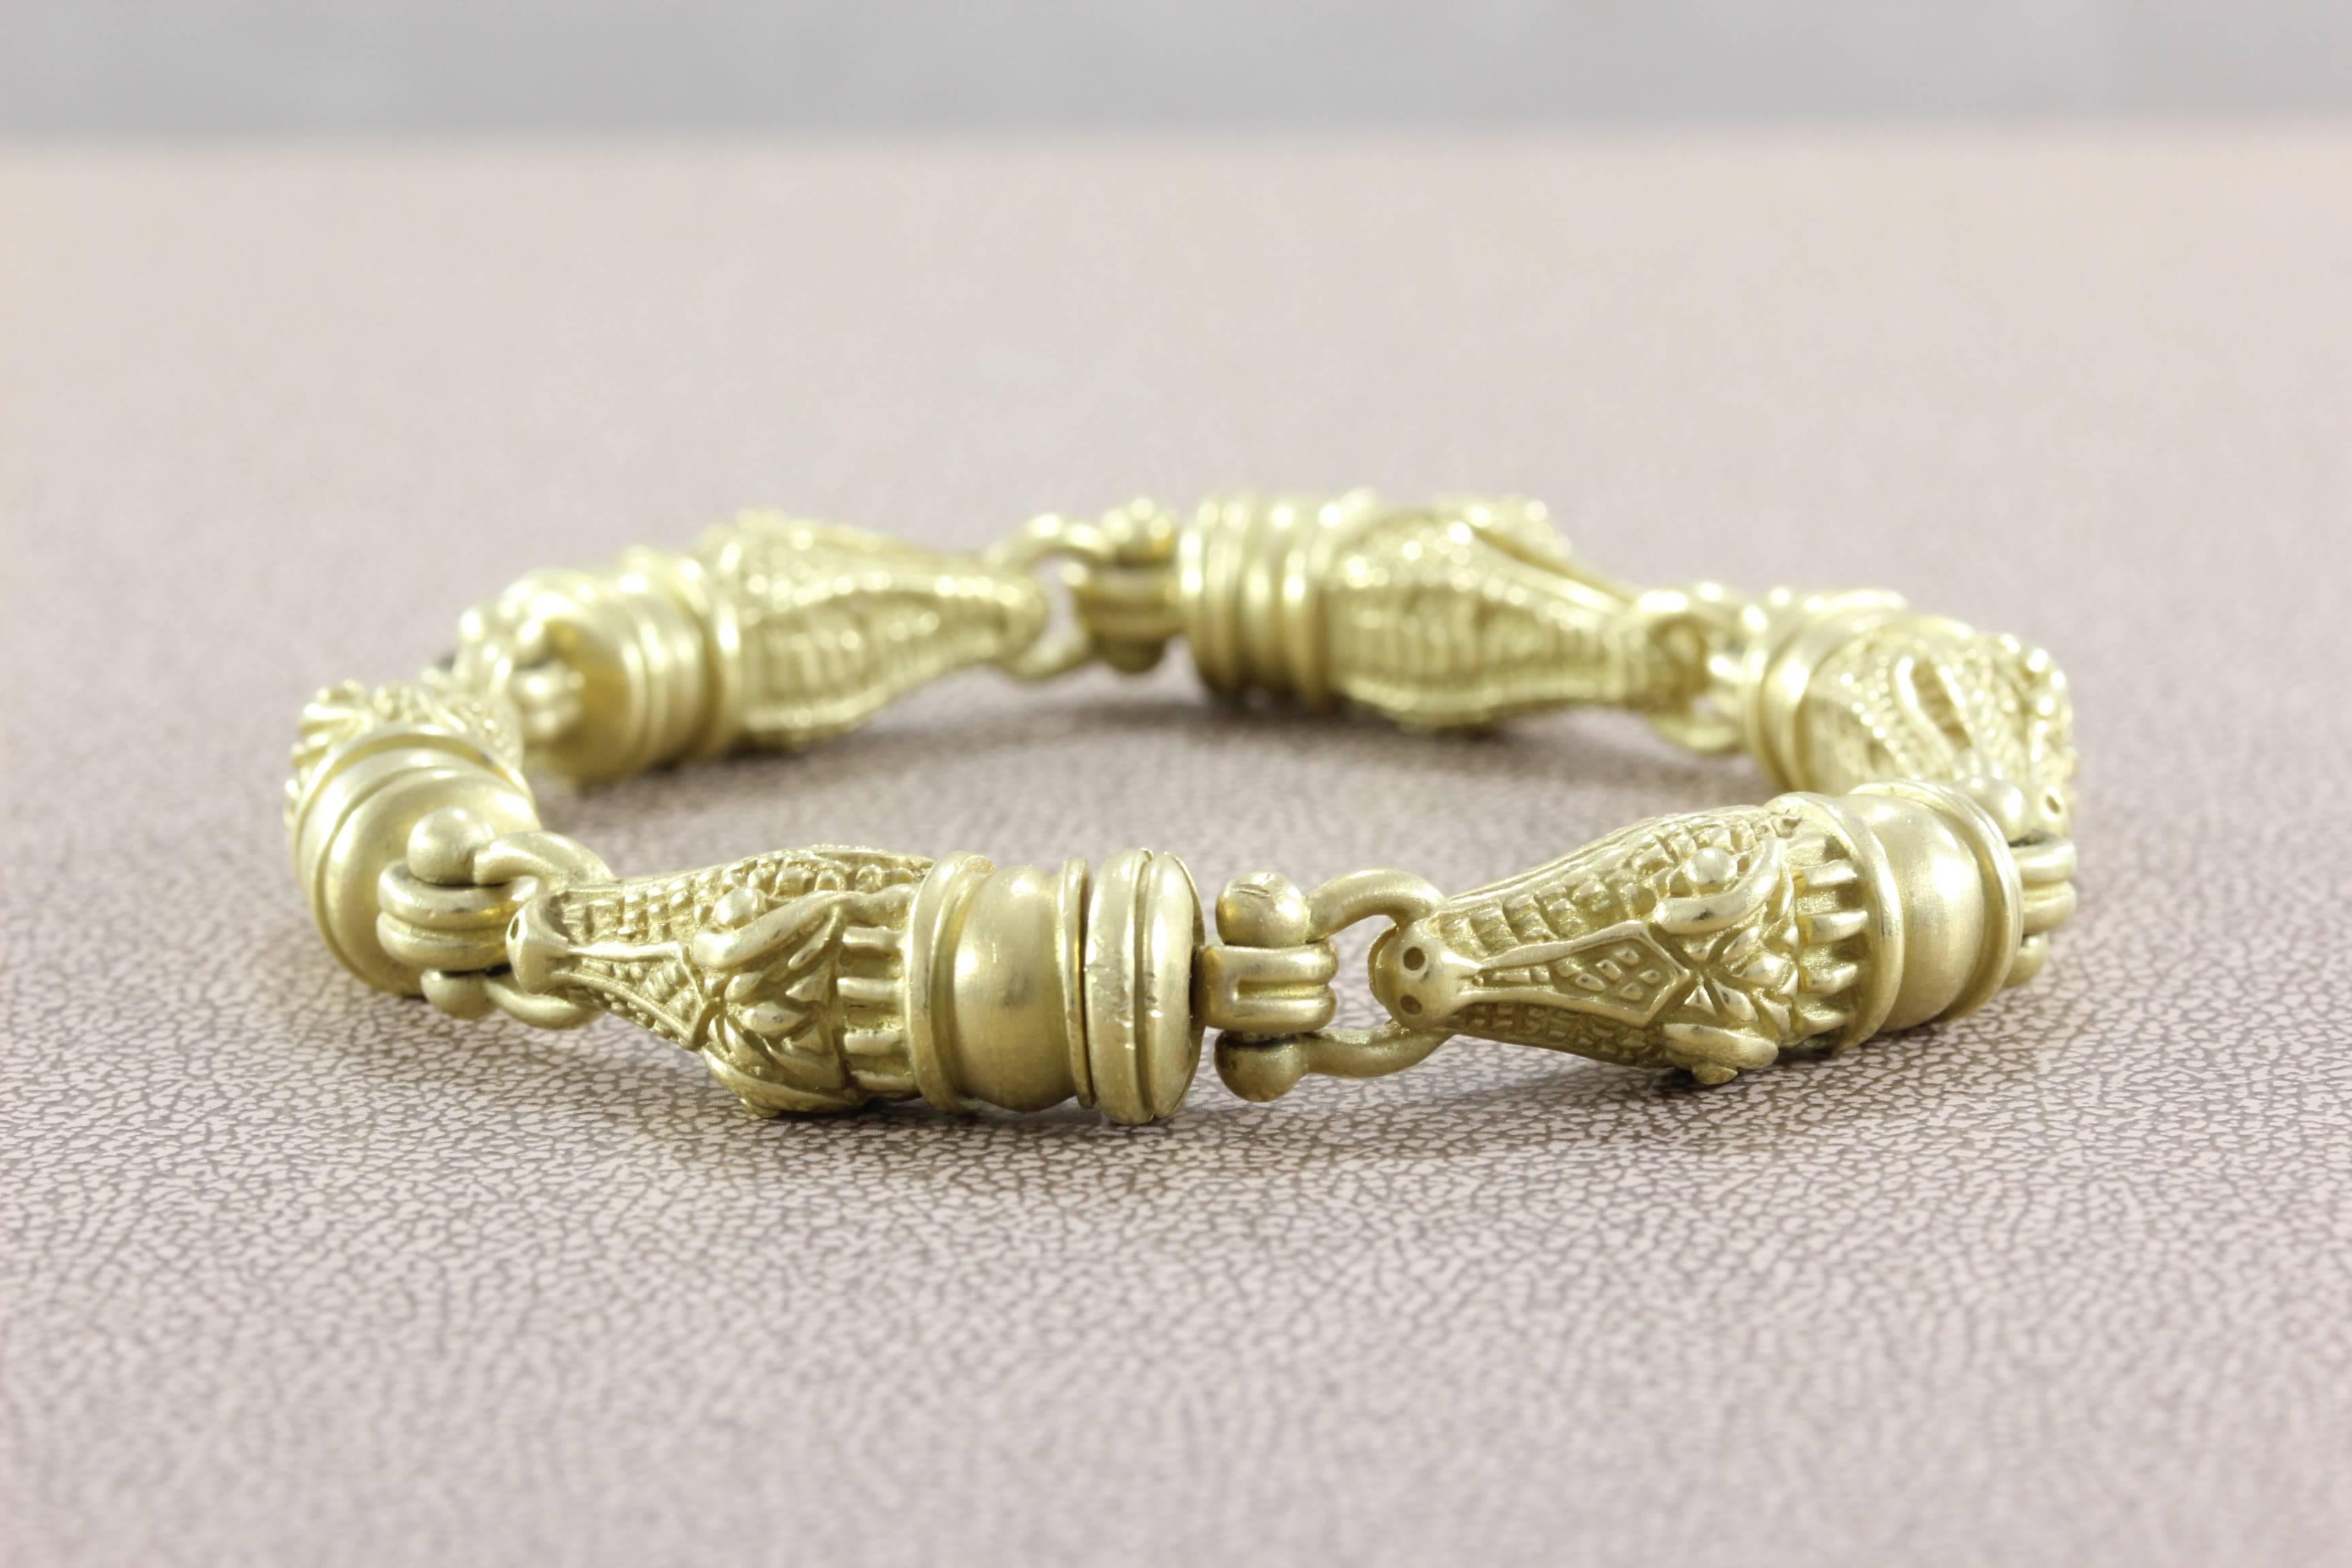 A Kieselstein-Cord original, this alligator bracelet is made in 18K yellow gold with six links. Each alligator is signed Kieselstein-Cord, length 7 inches.